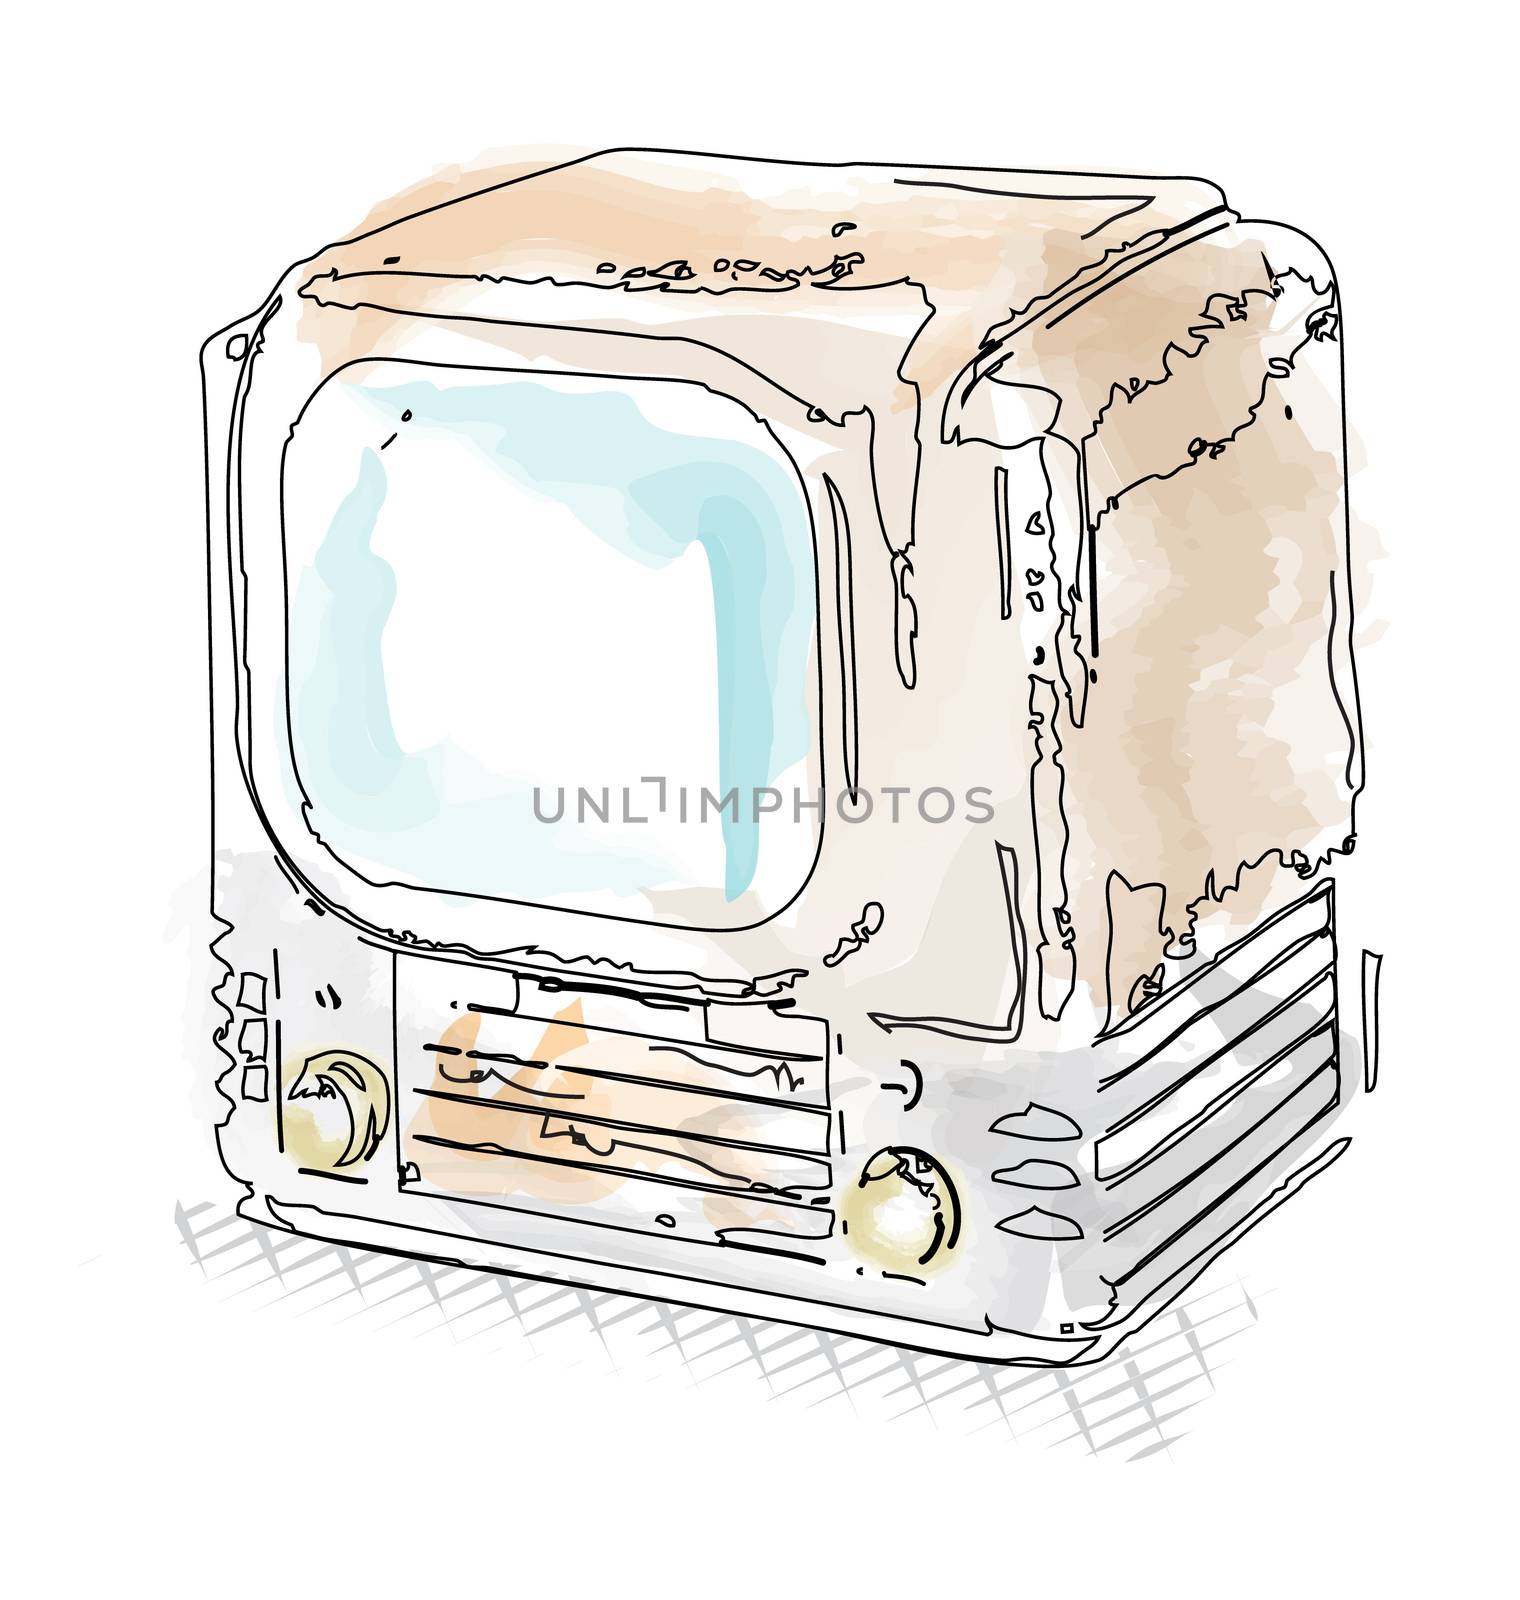 Retro TV illustration in watercolor style by stocklady